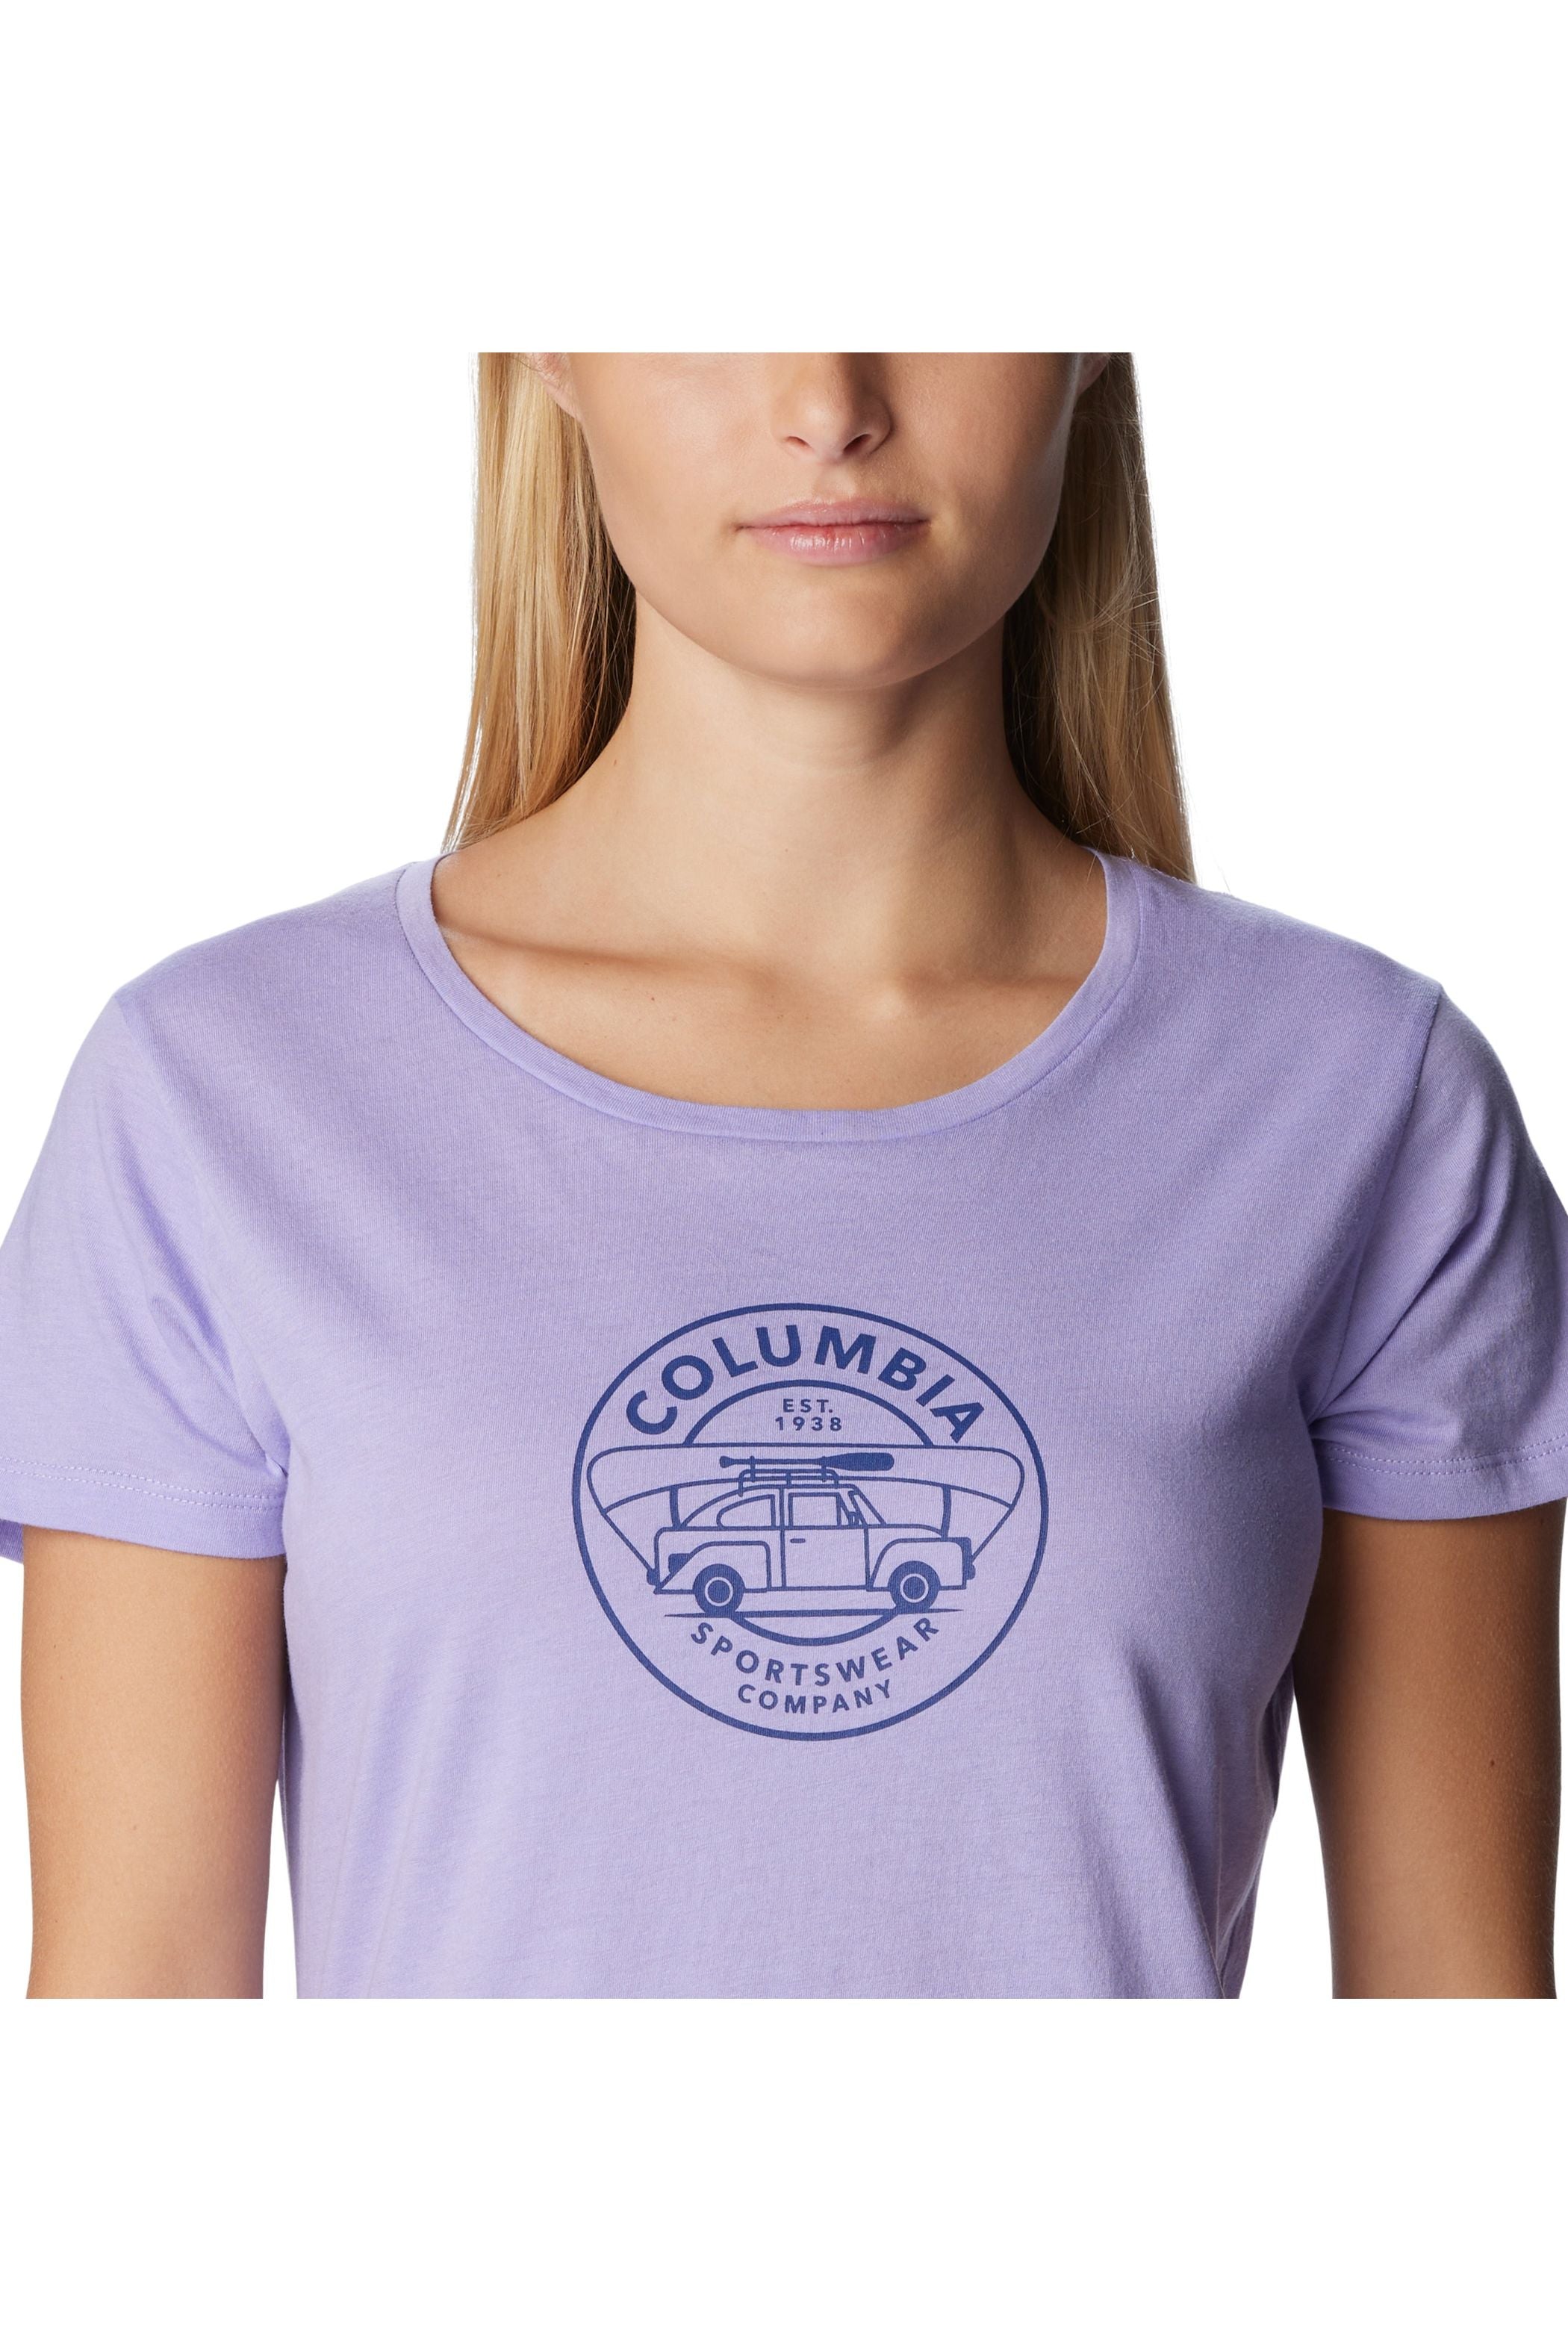 Columbia Daisy Days Graphic T-Shirt - Style 1934591